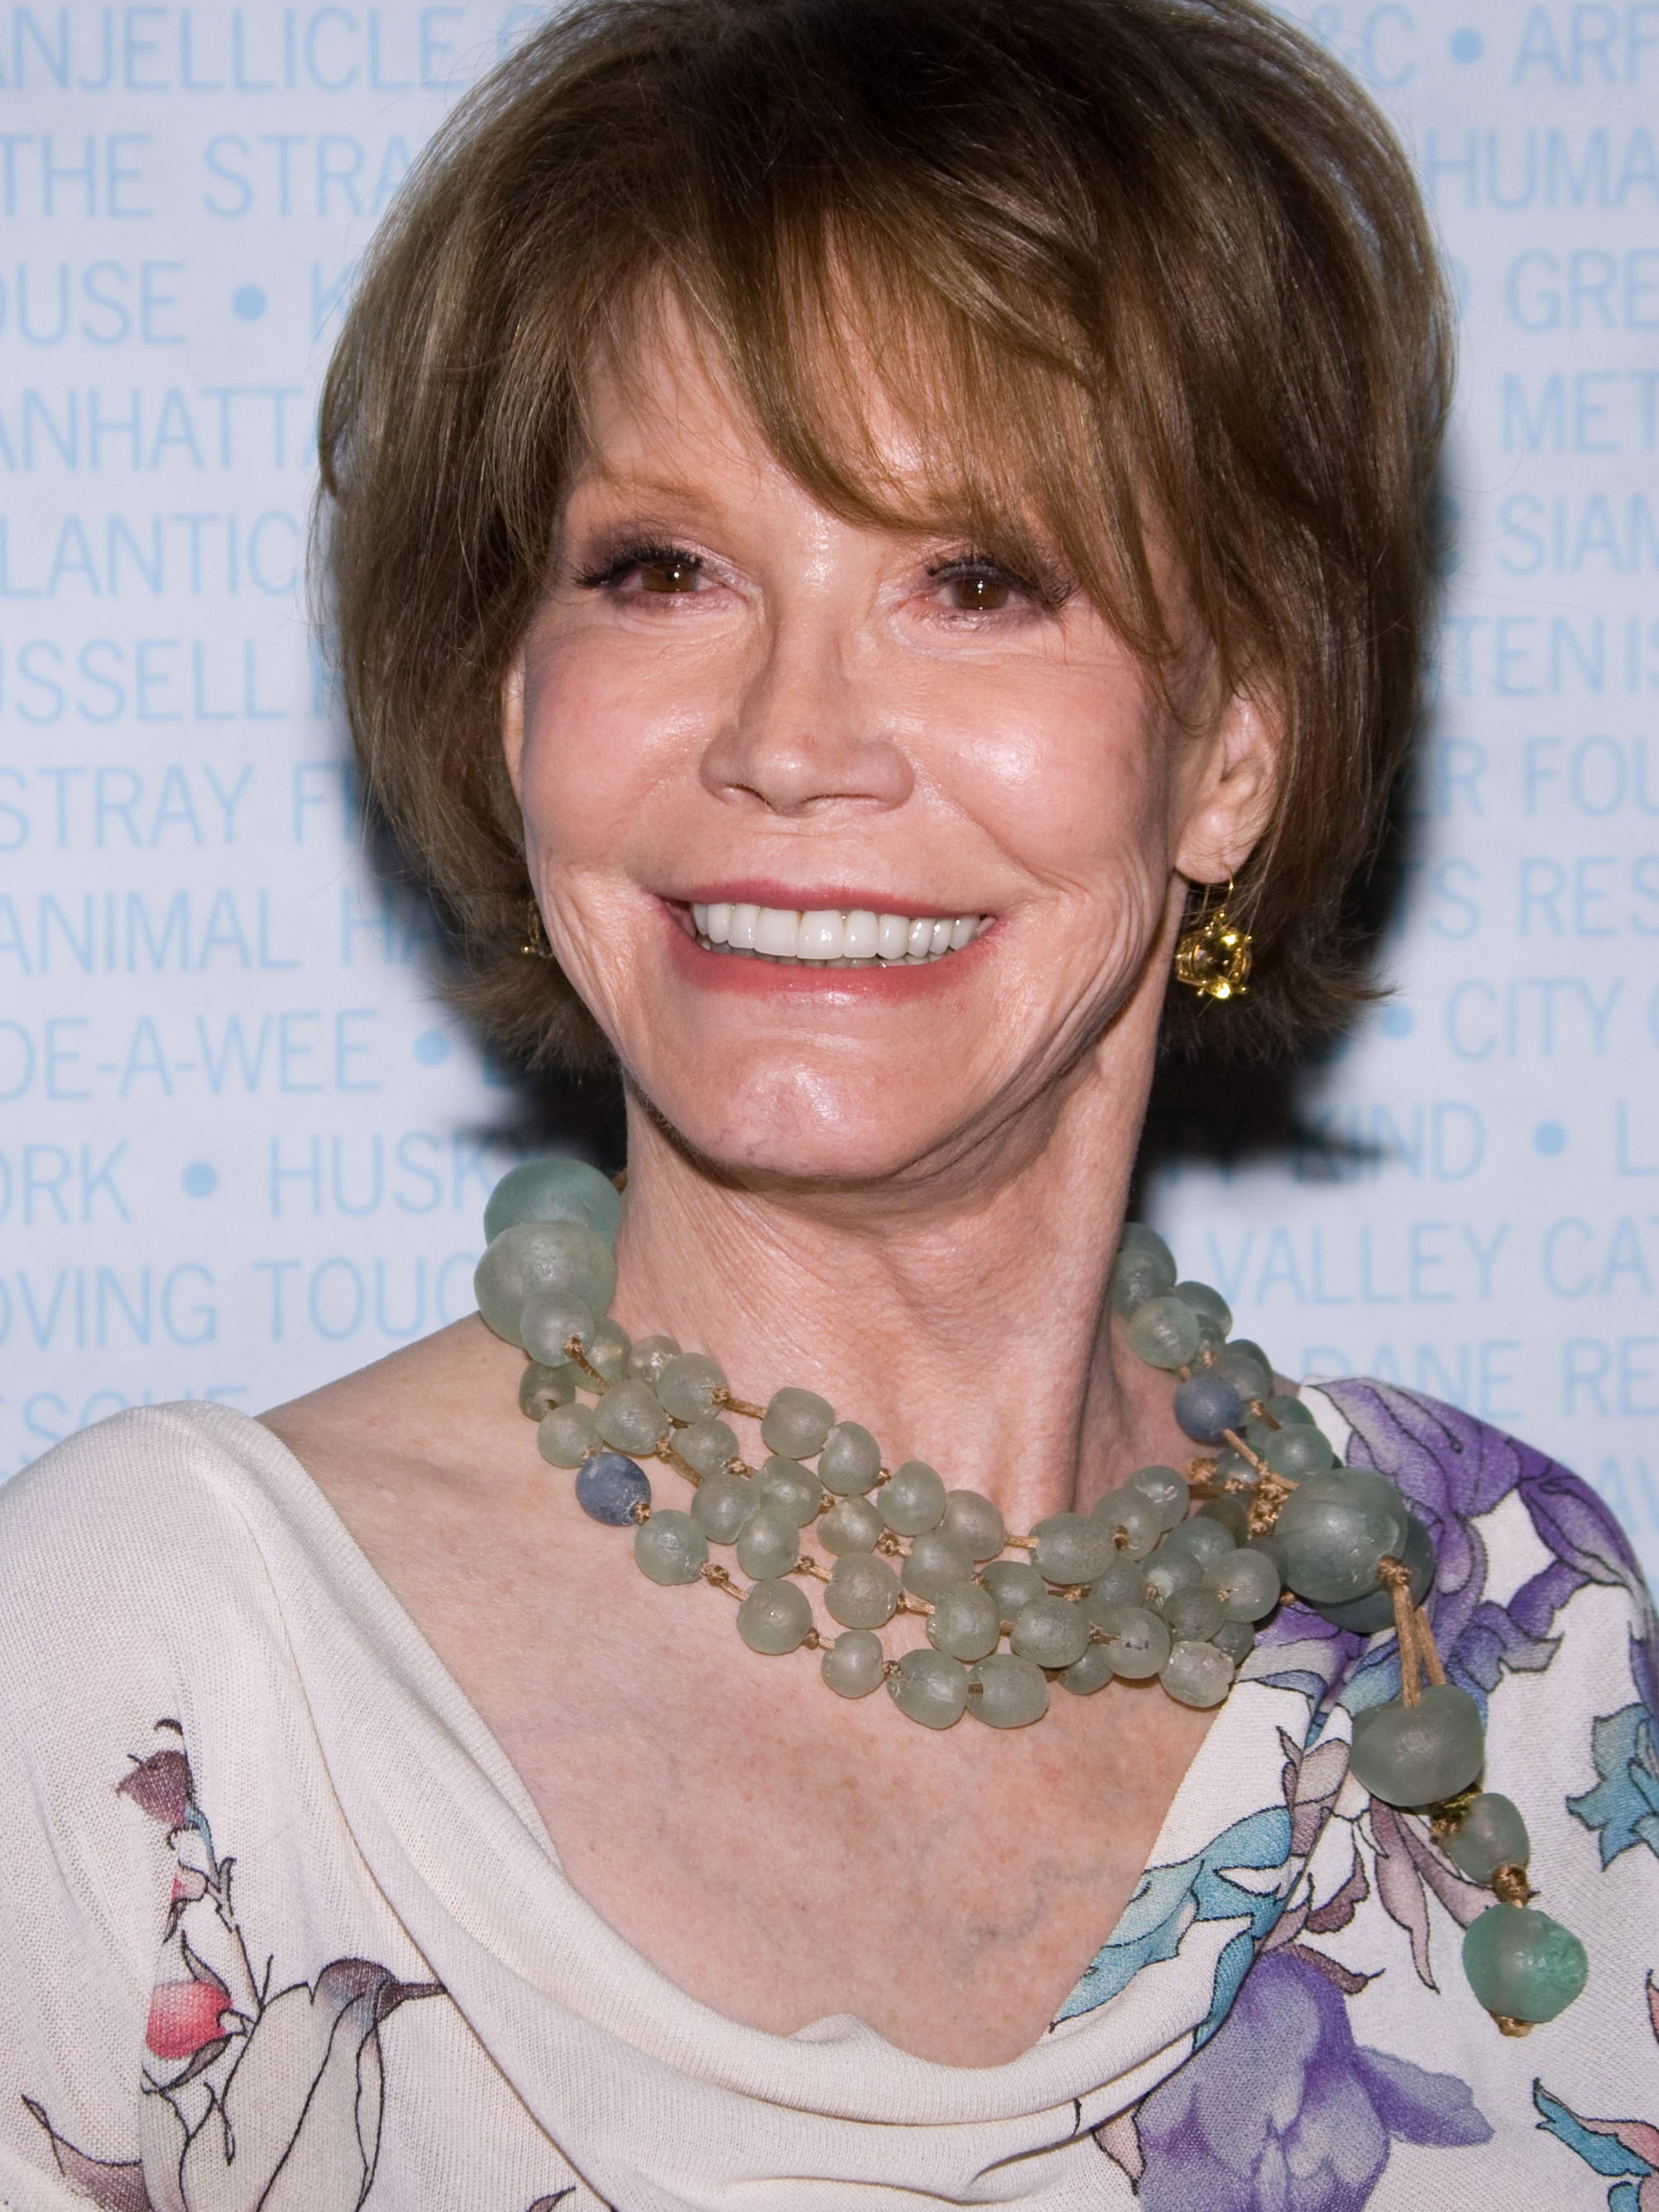 Appreciation: Yes, Mary Tyler Moore really did turn the world on with her  smile